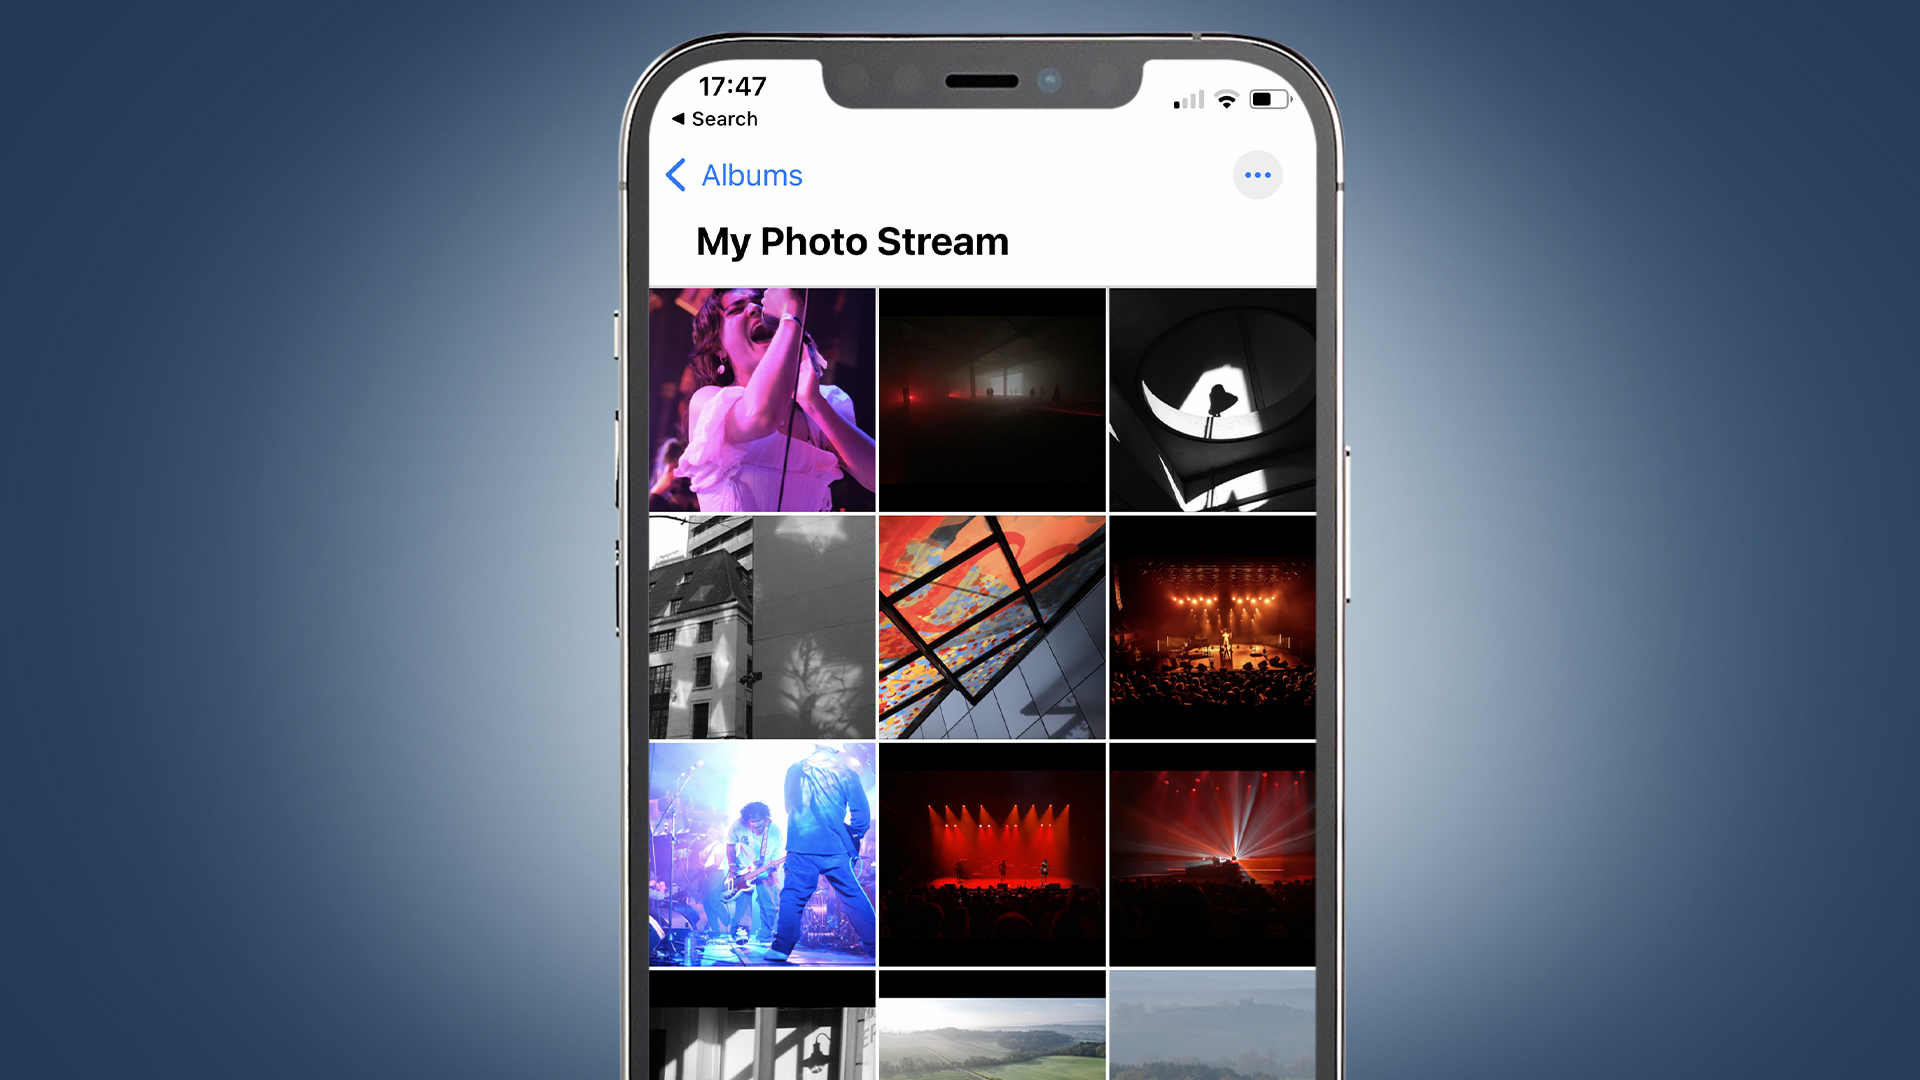 A mockup of the My Photo Stream page